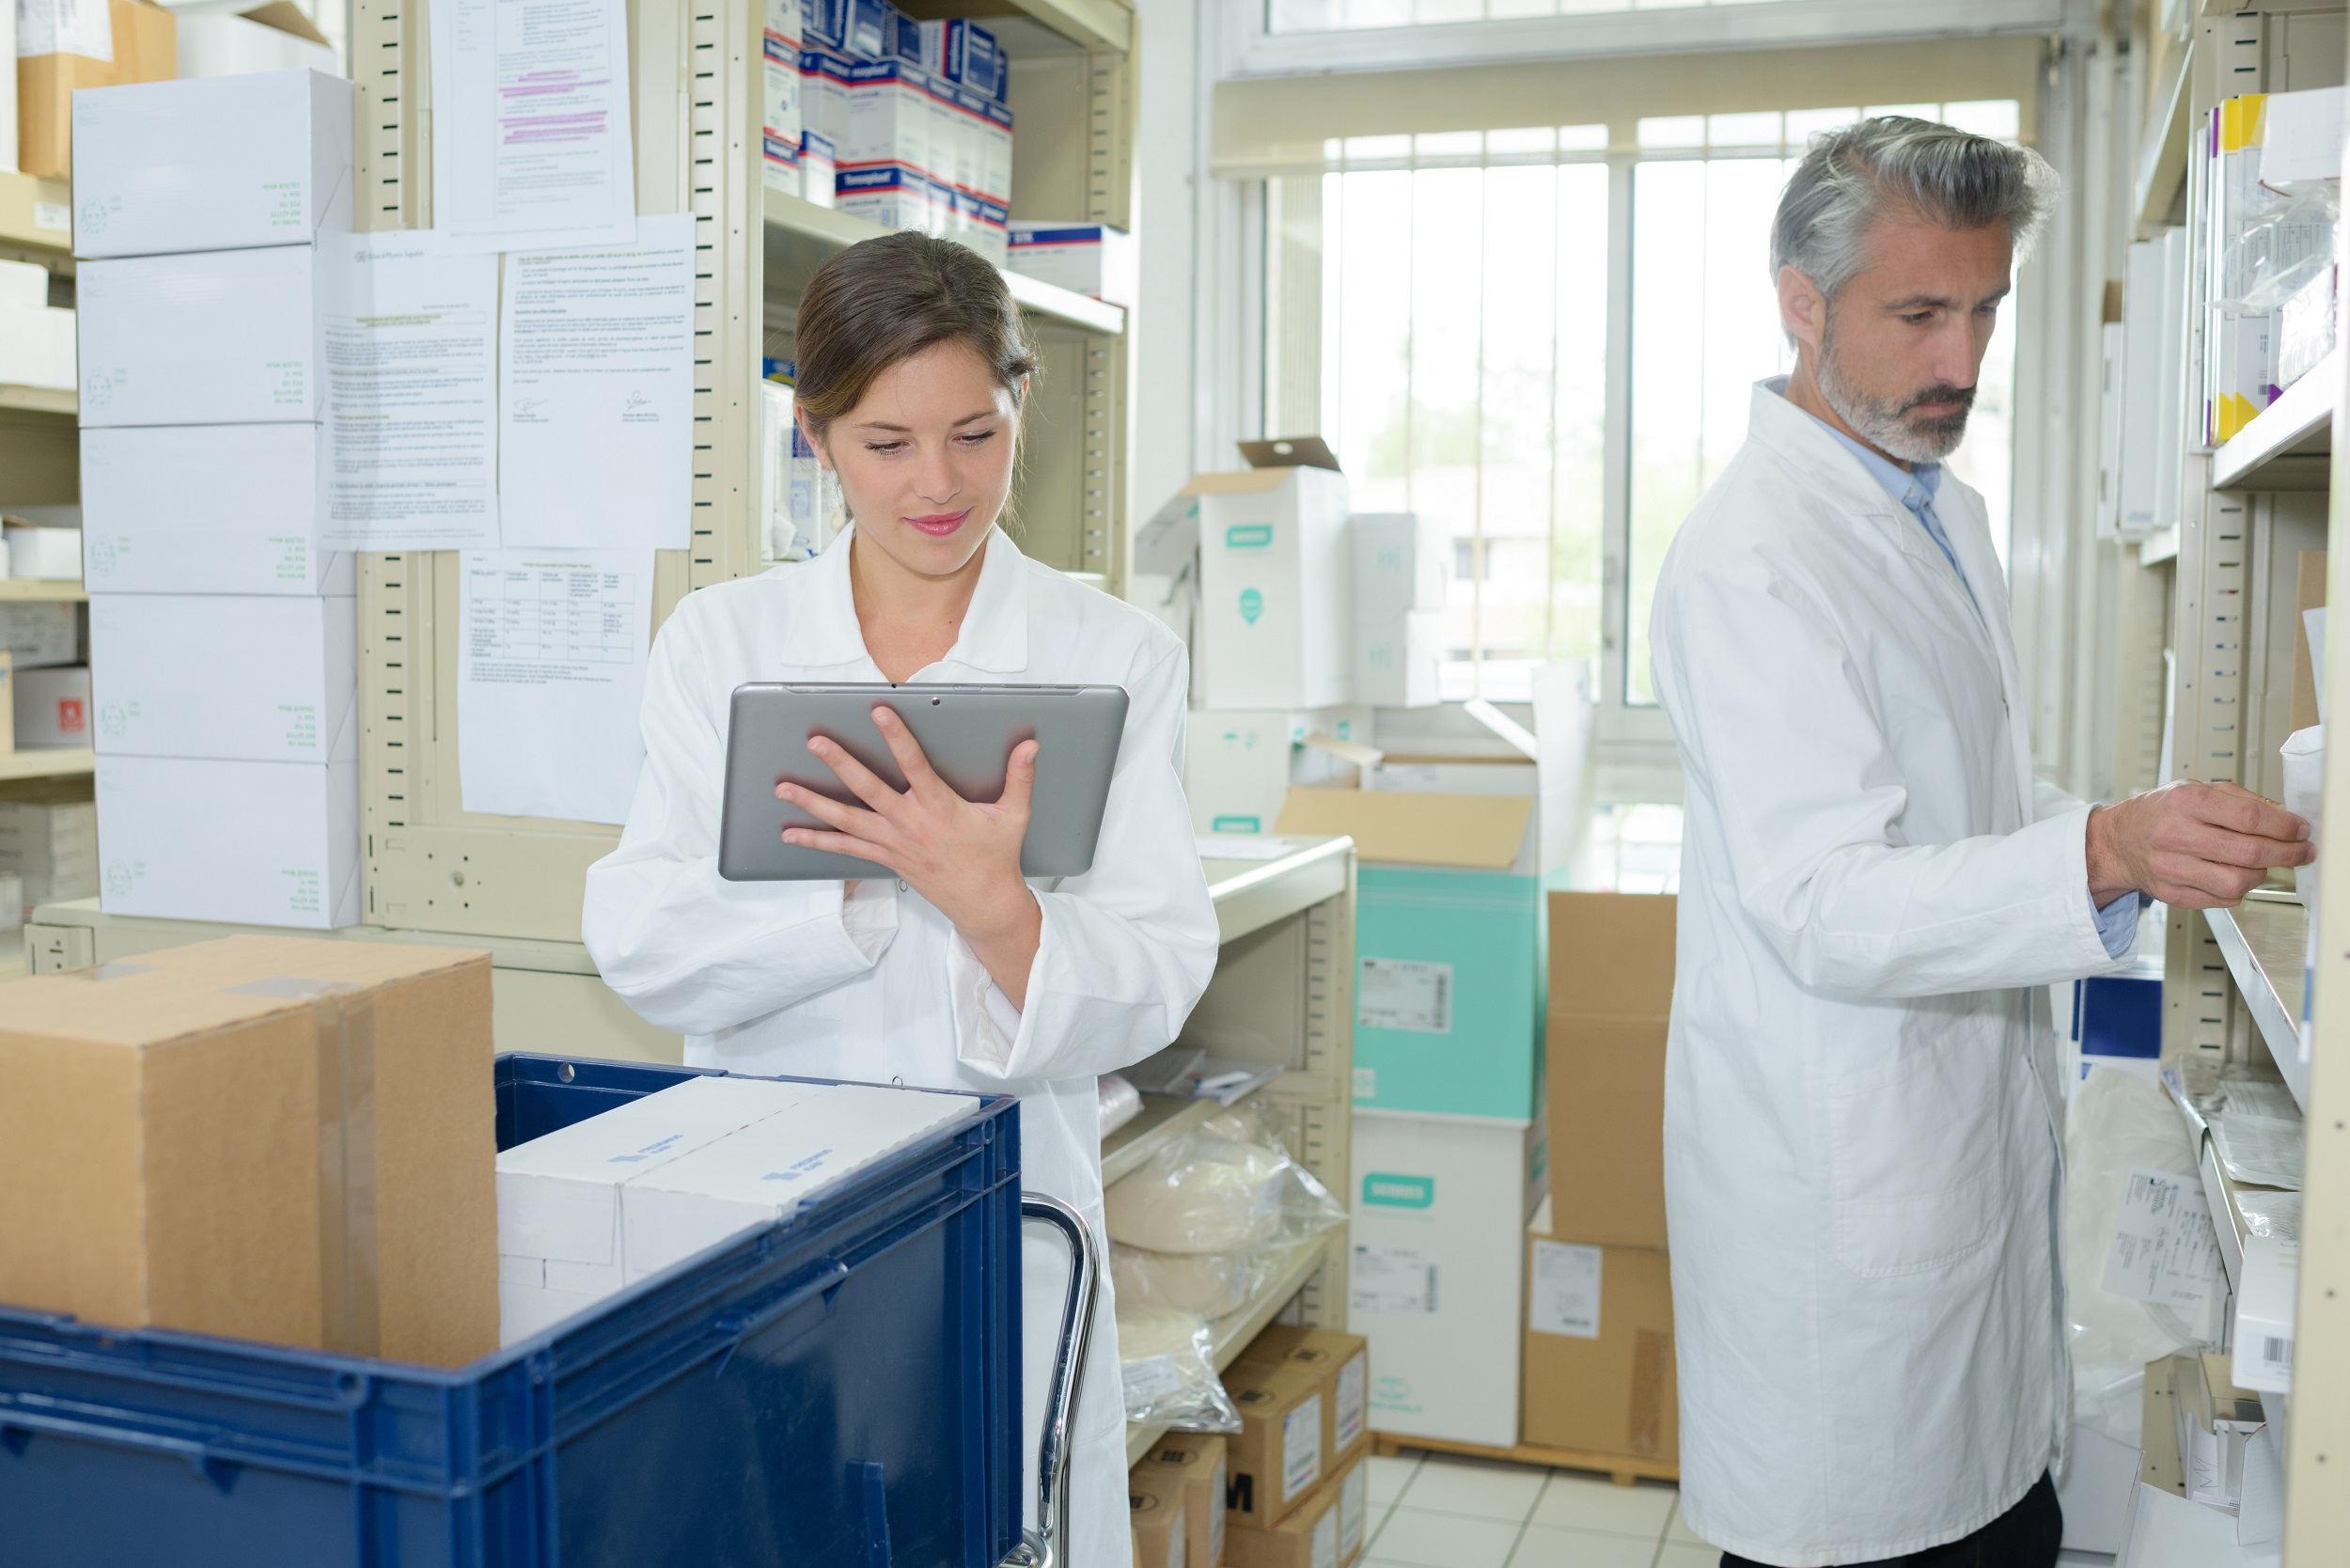 A man and a woman both wearing white coats are in a room with metal shelving. The woman is looking at an iPad and the man is checking stock on the shelves. The stock is all medical supplies in boxes.